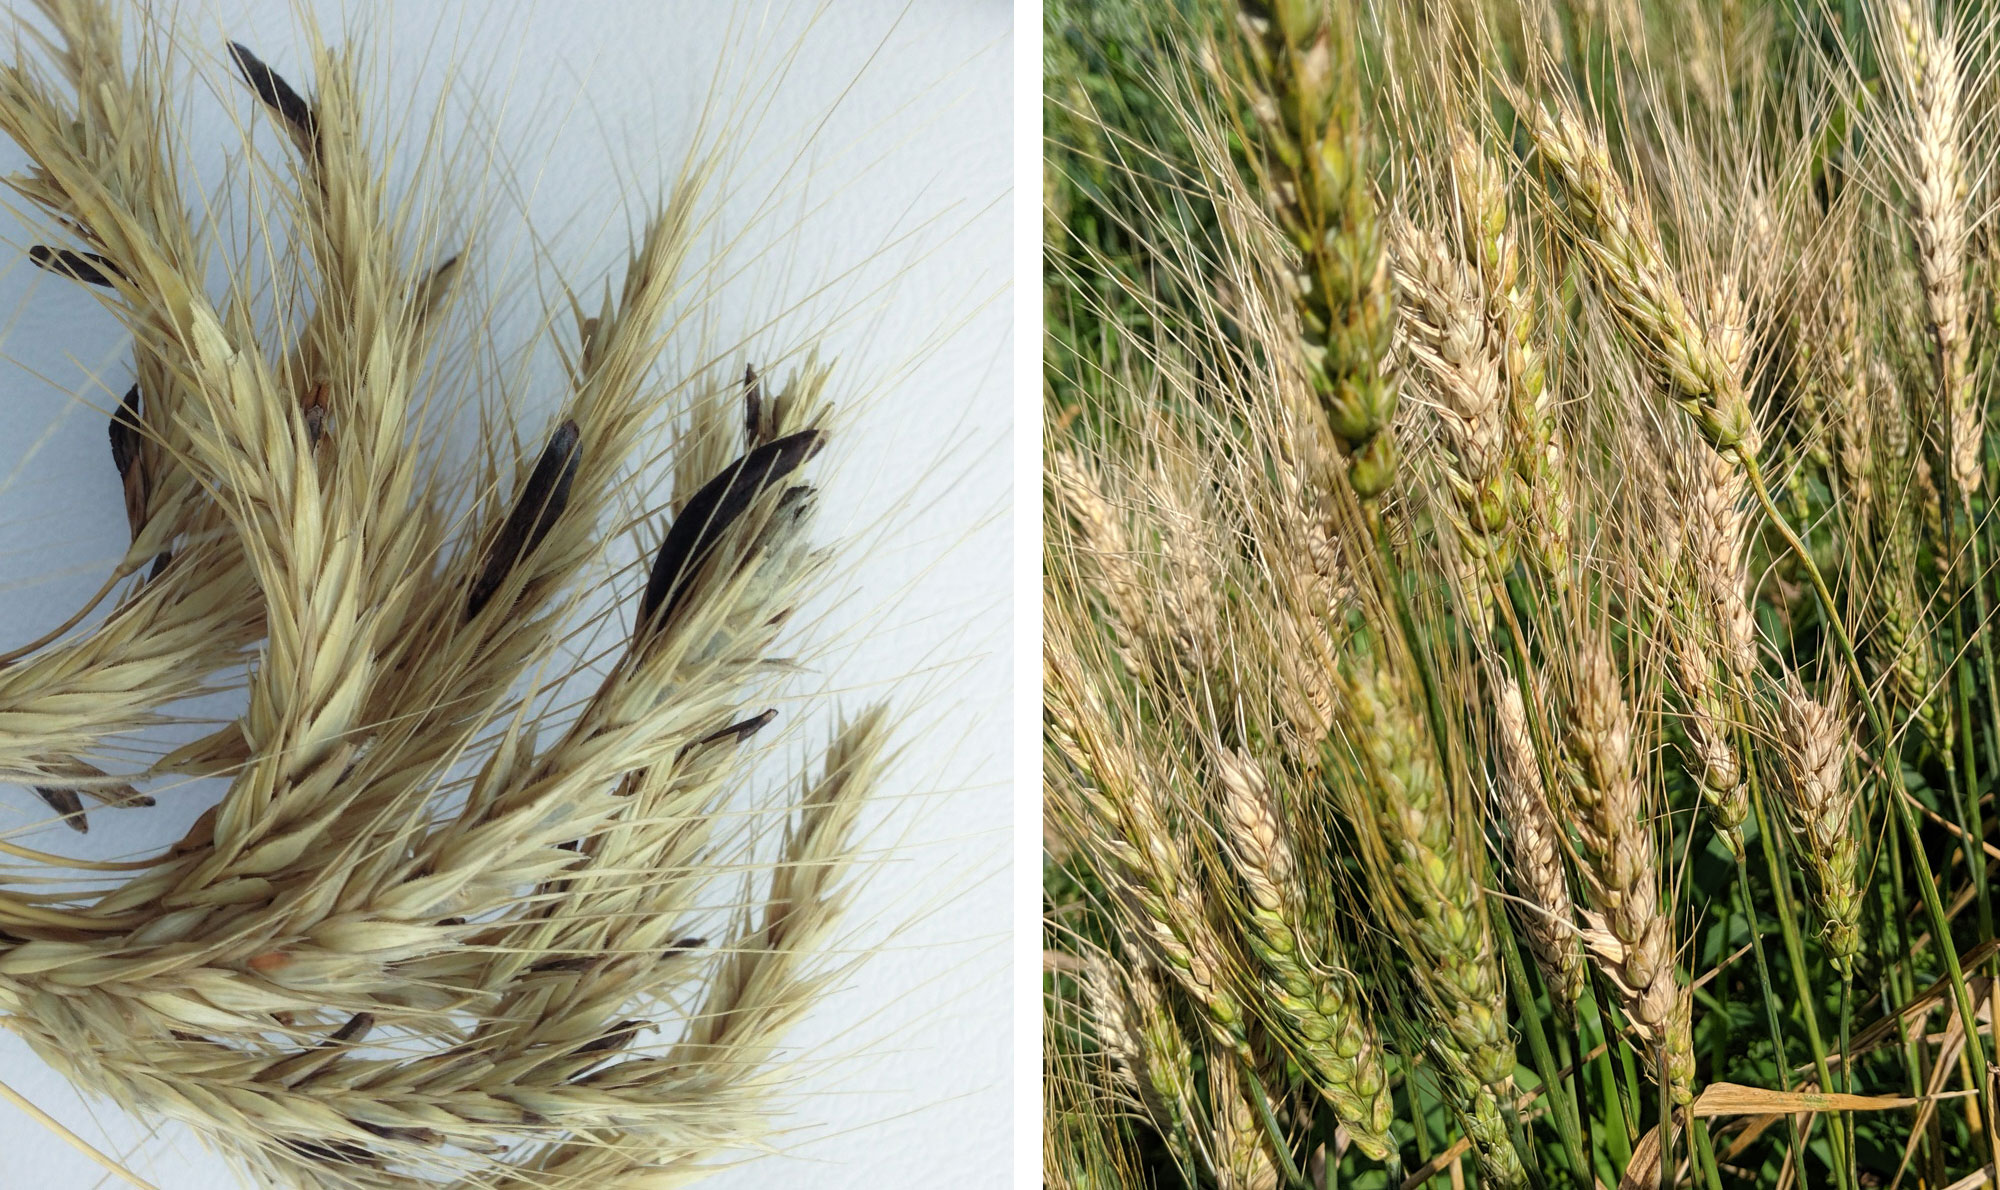 Two diseased wheat plants side-by-side. The wheat heads on the left have ergot bodies throughout. The wheat plants on the right are infected with Fusarium head blight.